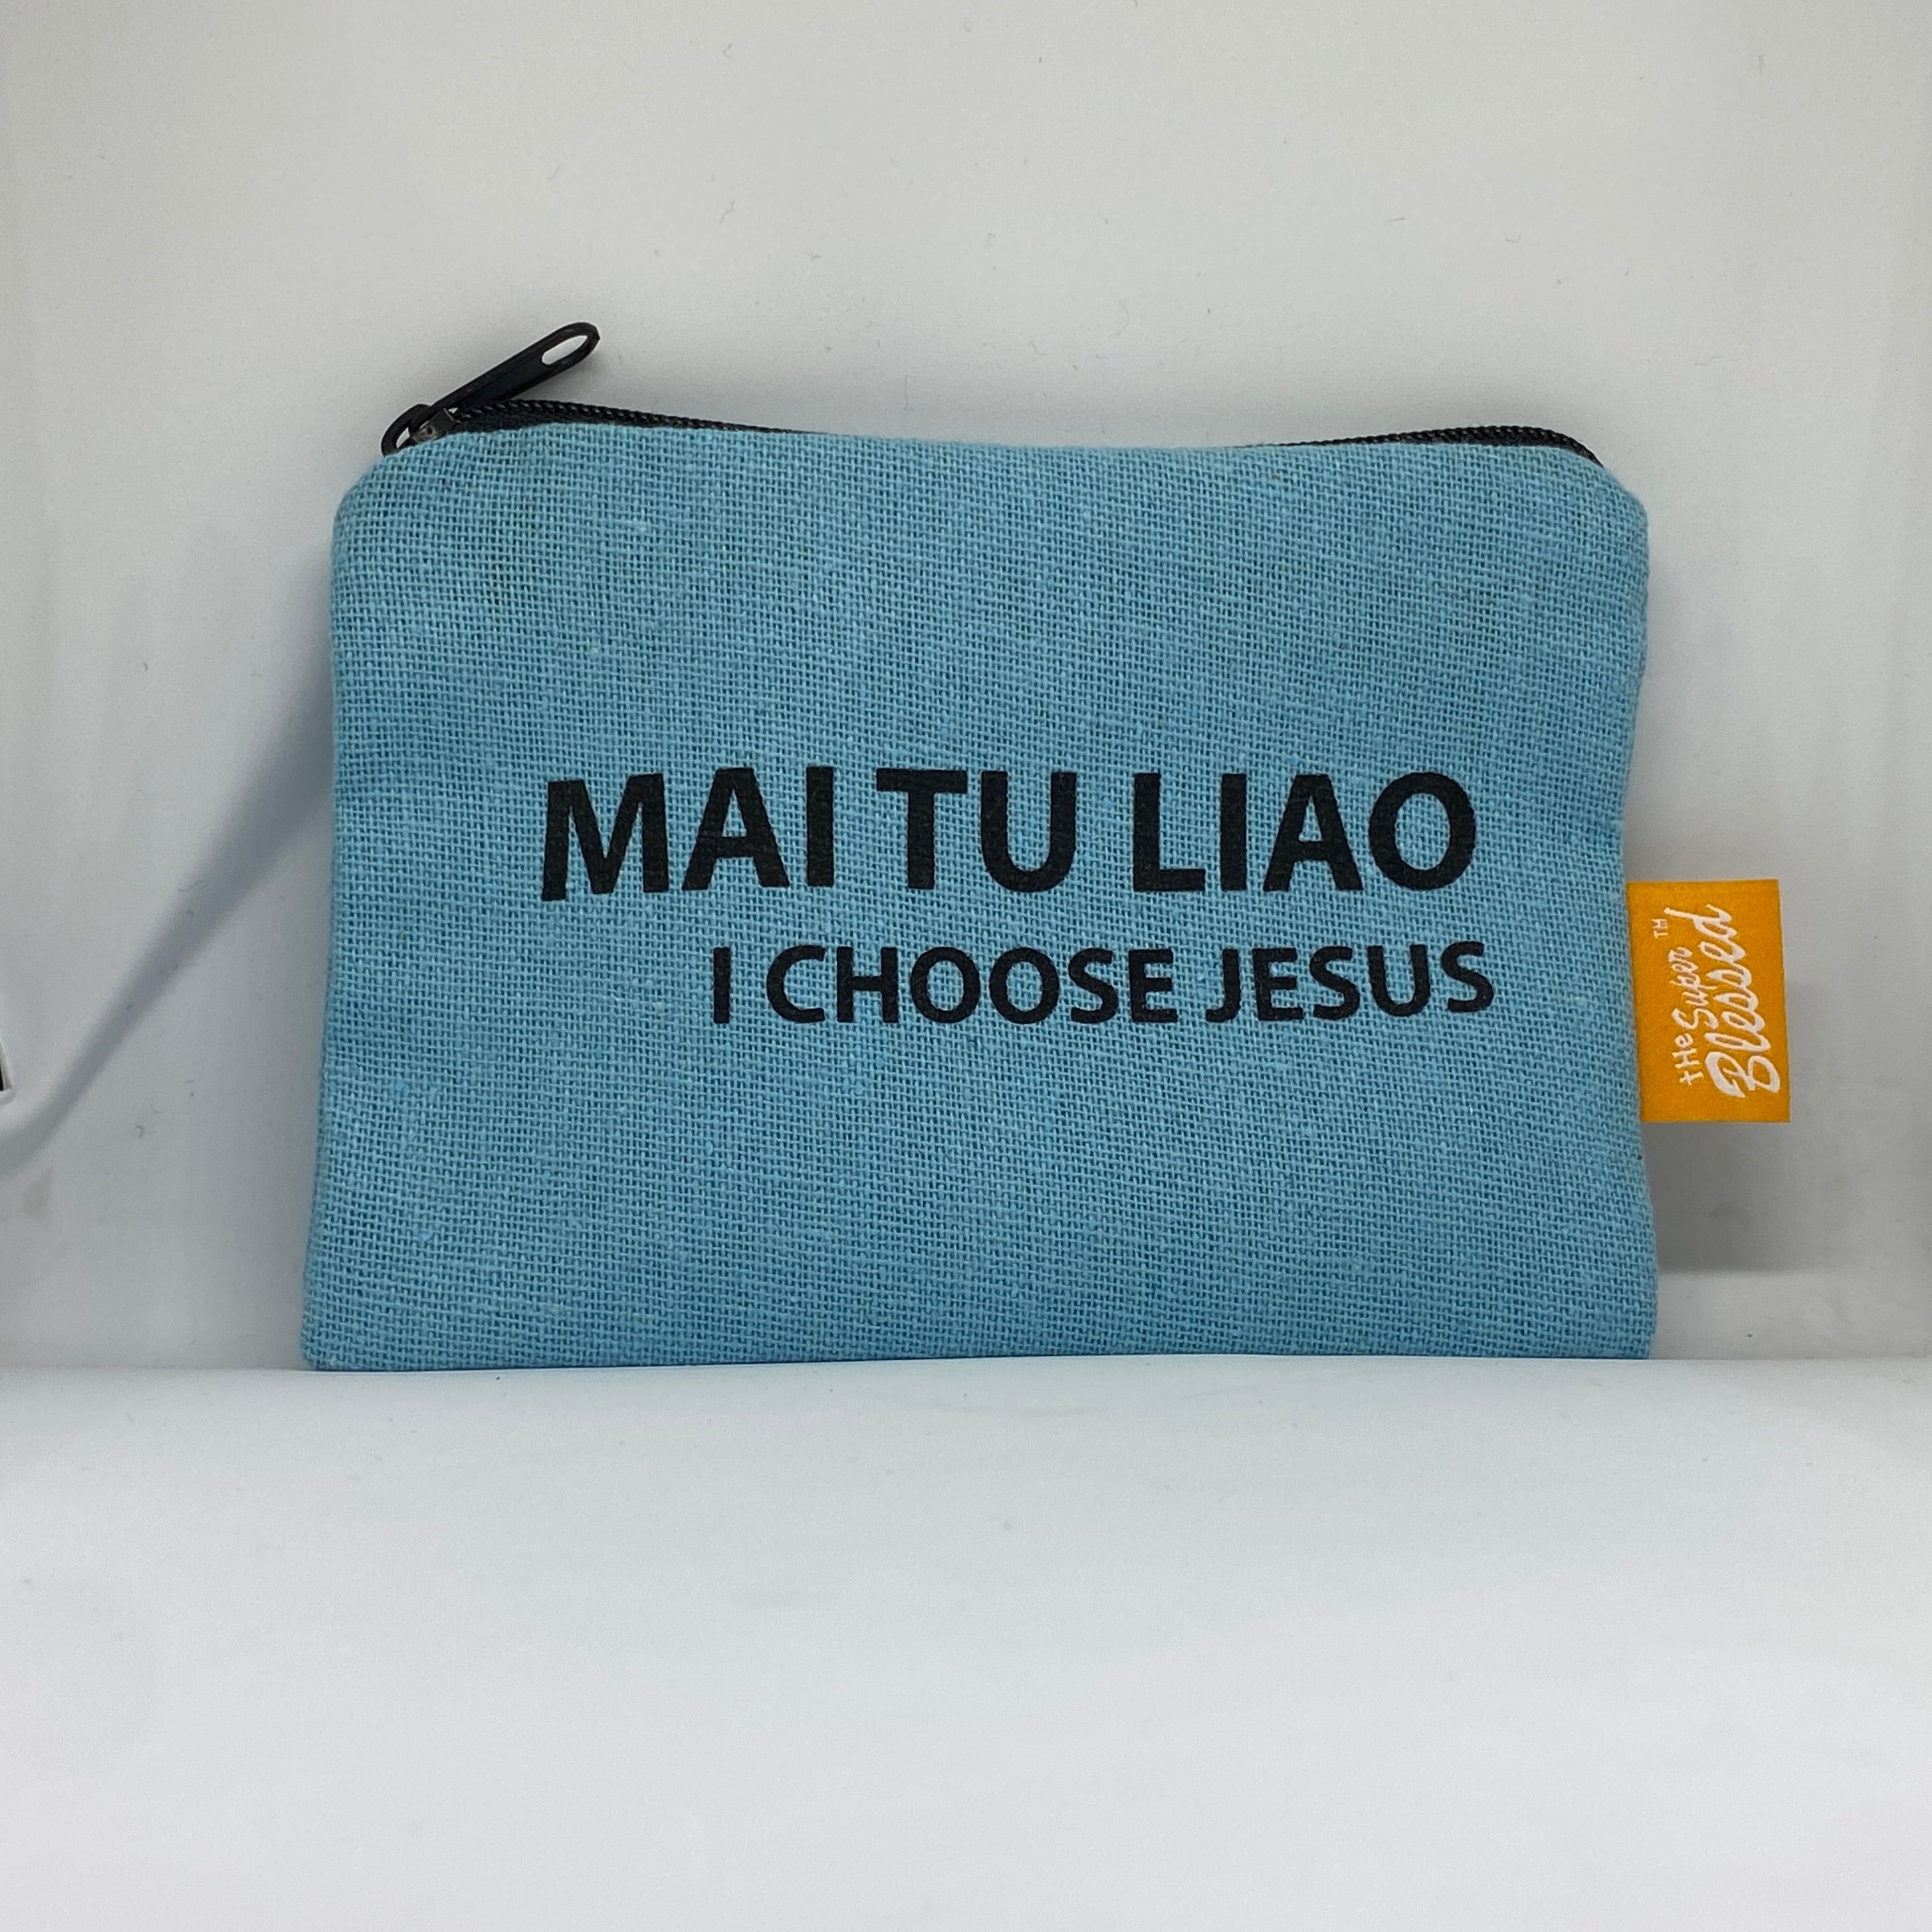 ROCKONLINE | New Creation Church | Joseph Prince | Scriptures | Gifts | Coin Pouch | Scriptures | Canvas Coin Pouch 13x9cm | Christian Gifts | Small Gifts | Women | Youth | The Super Blessed | Rock Bookshop | Rock Bookstore | Star Vista | Free Delivery for Singapore Orders above $50.